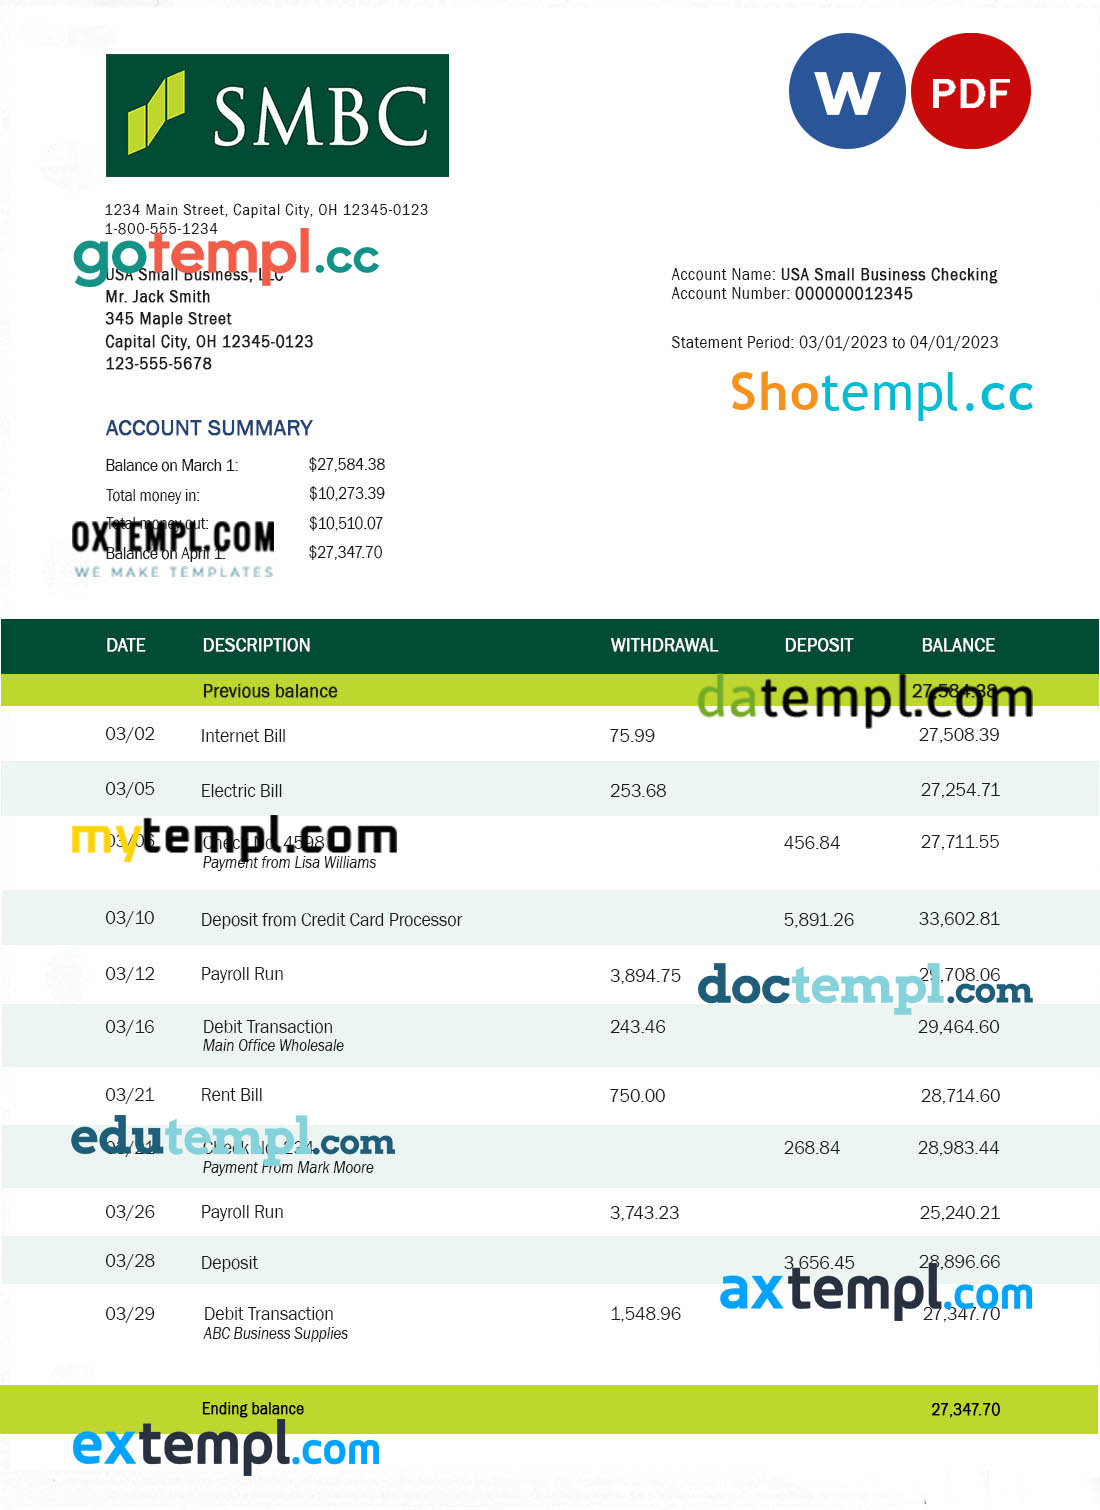 Zambia Cavmont bank statement template in Word and PDF format